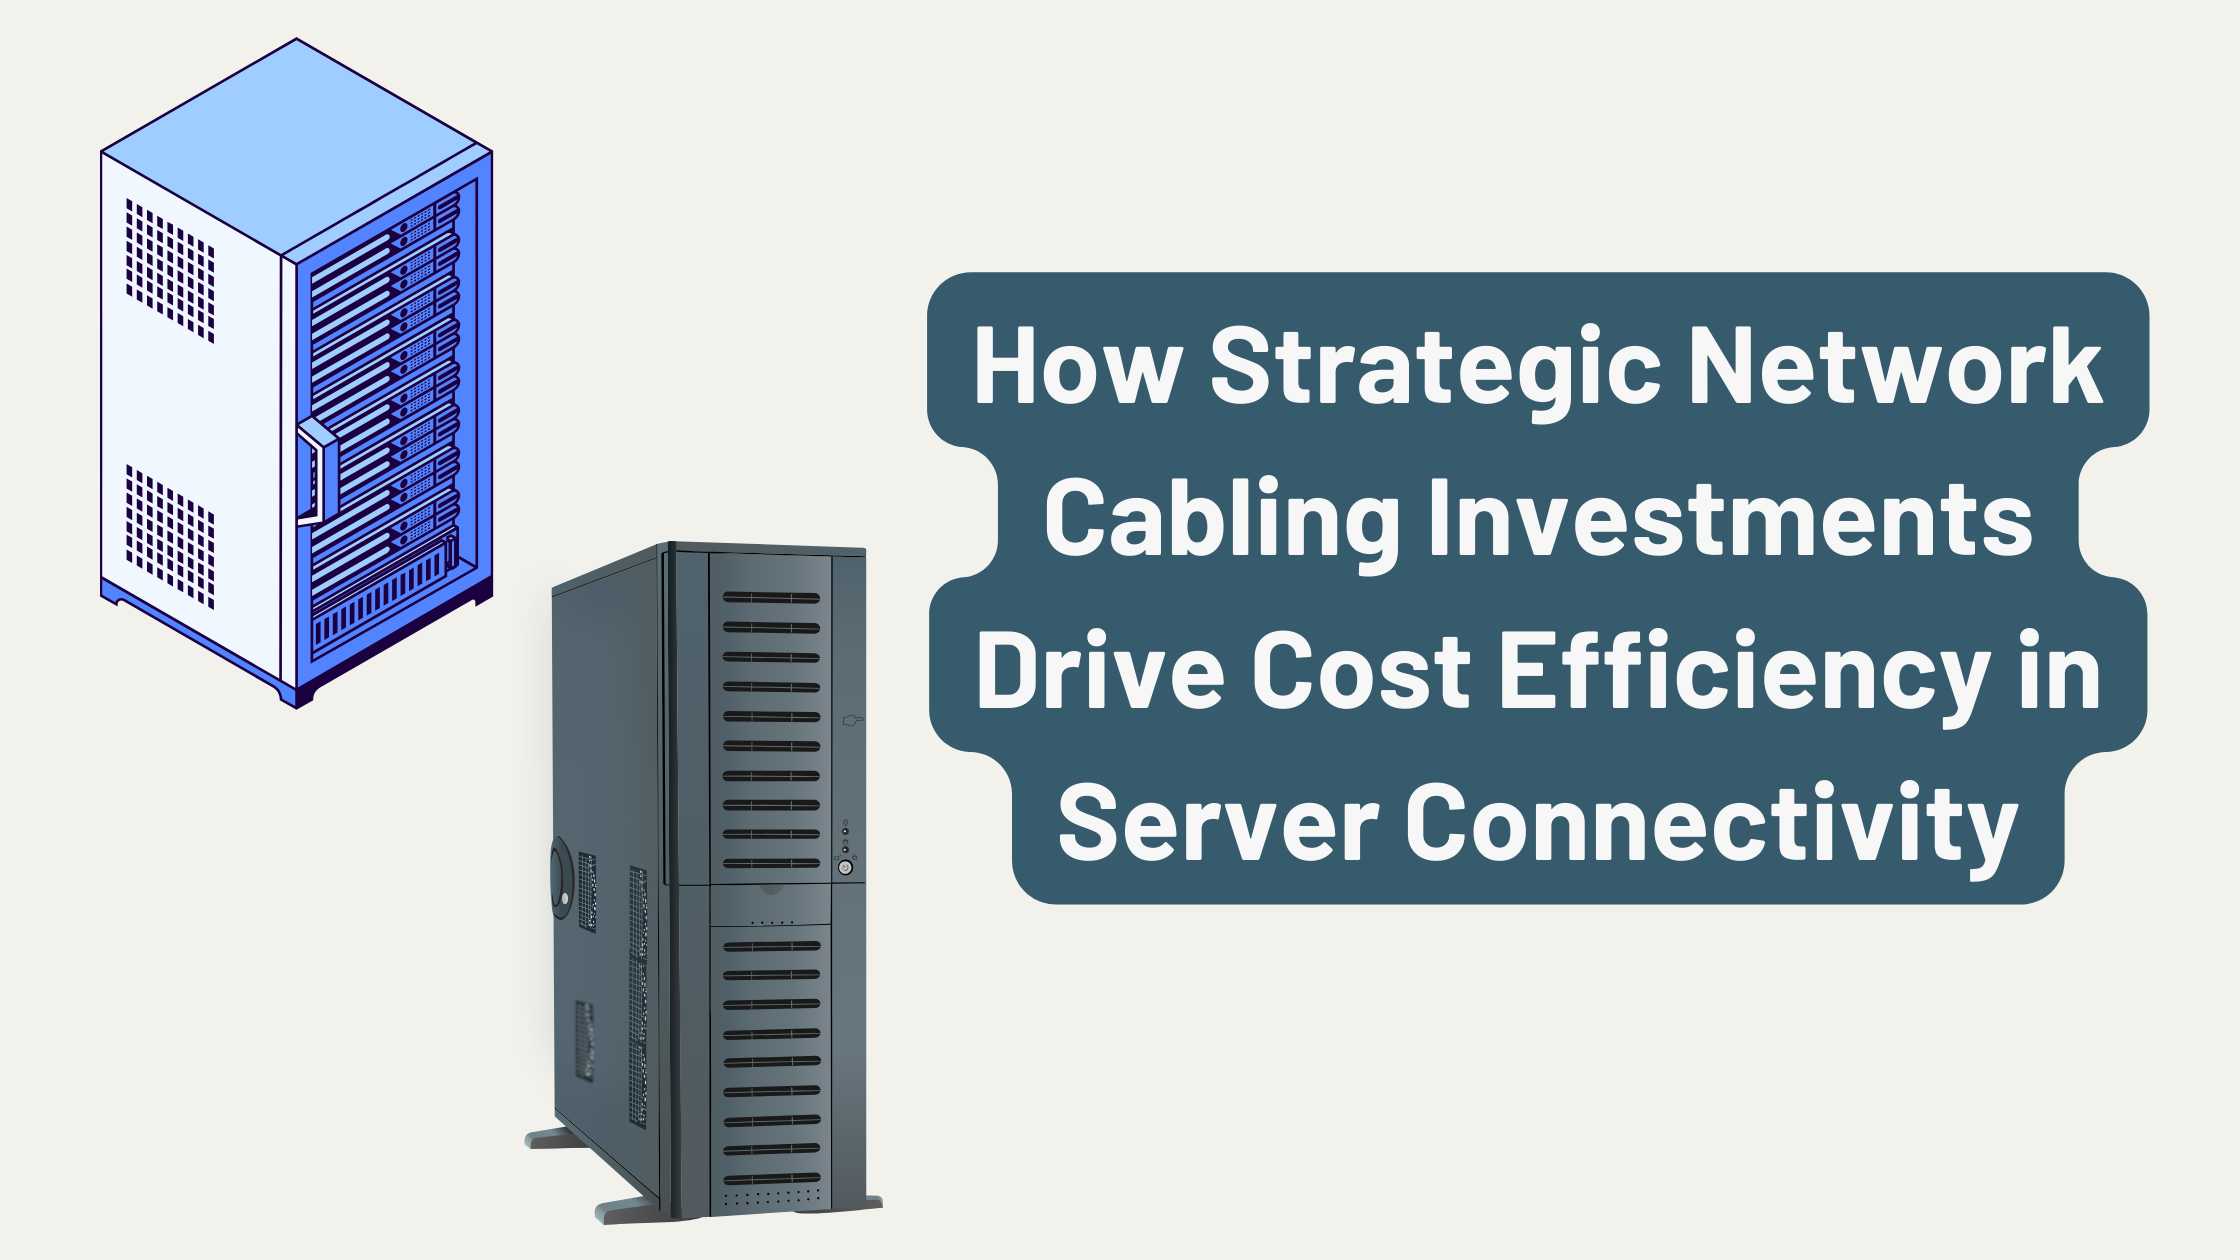 How Strategic Network Cabling Investments Drive Cost Efficiency in Server Connectivity